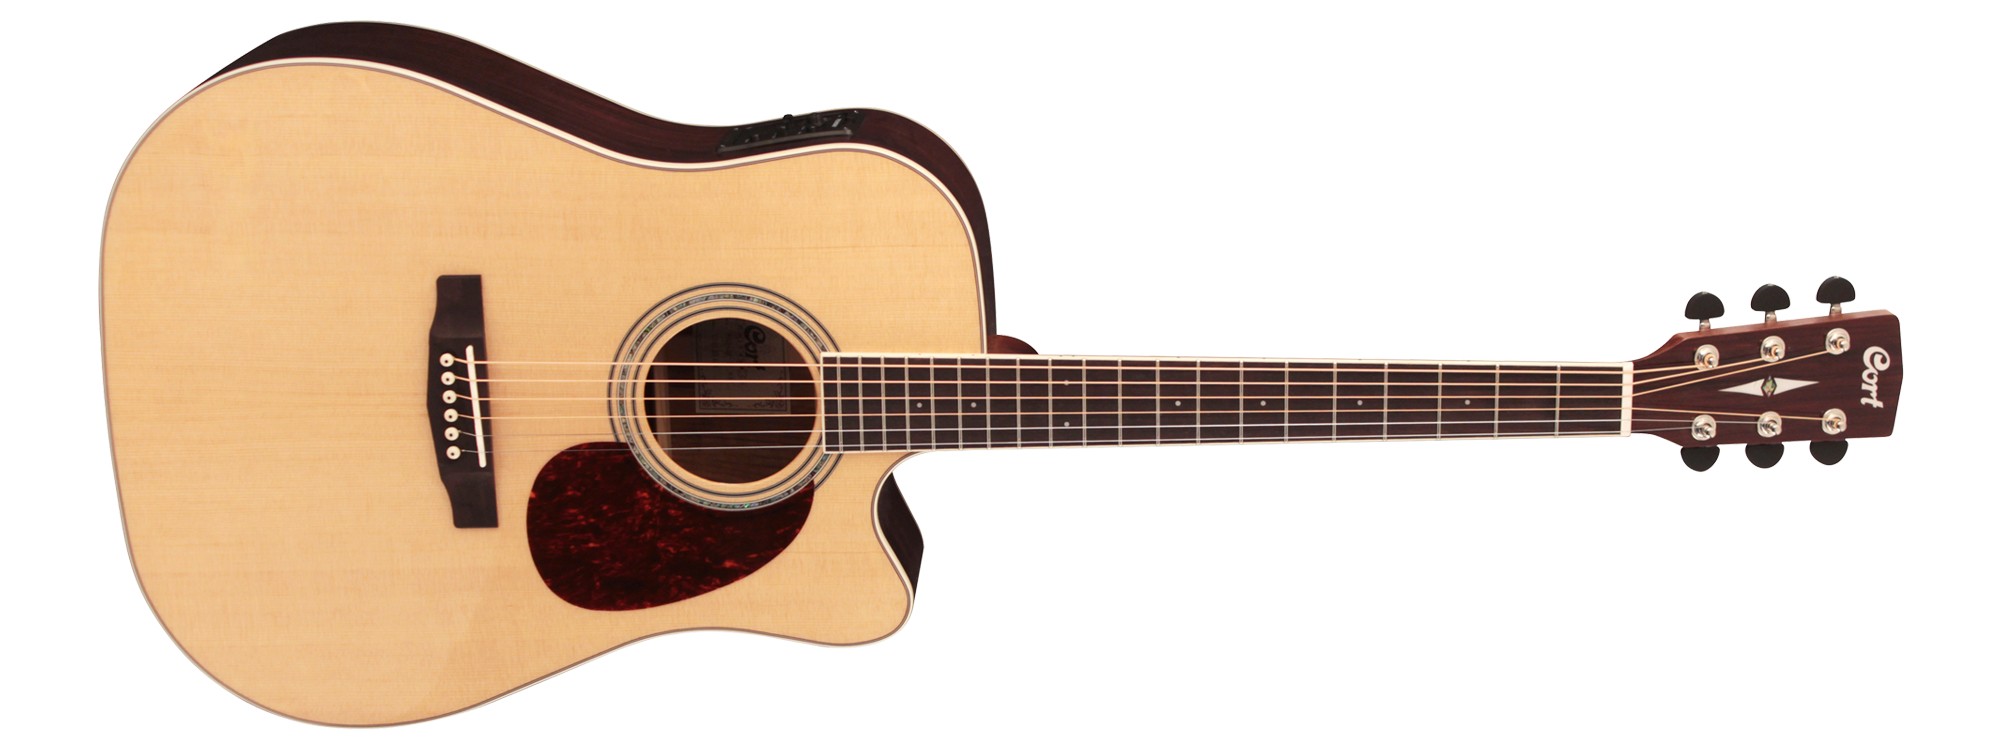 Cort MR710F Natural Satin, Electro Acoustic Guitar for sale at Richards Guitars.